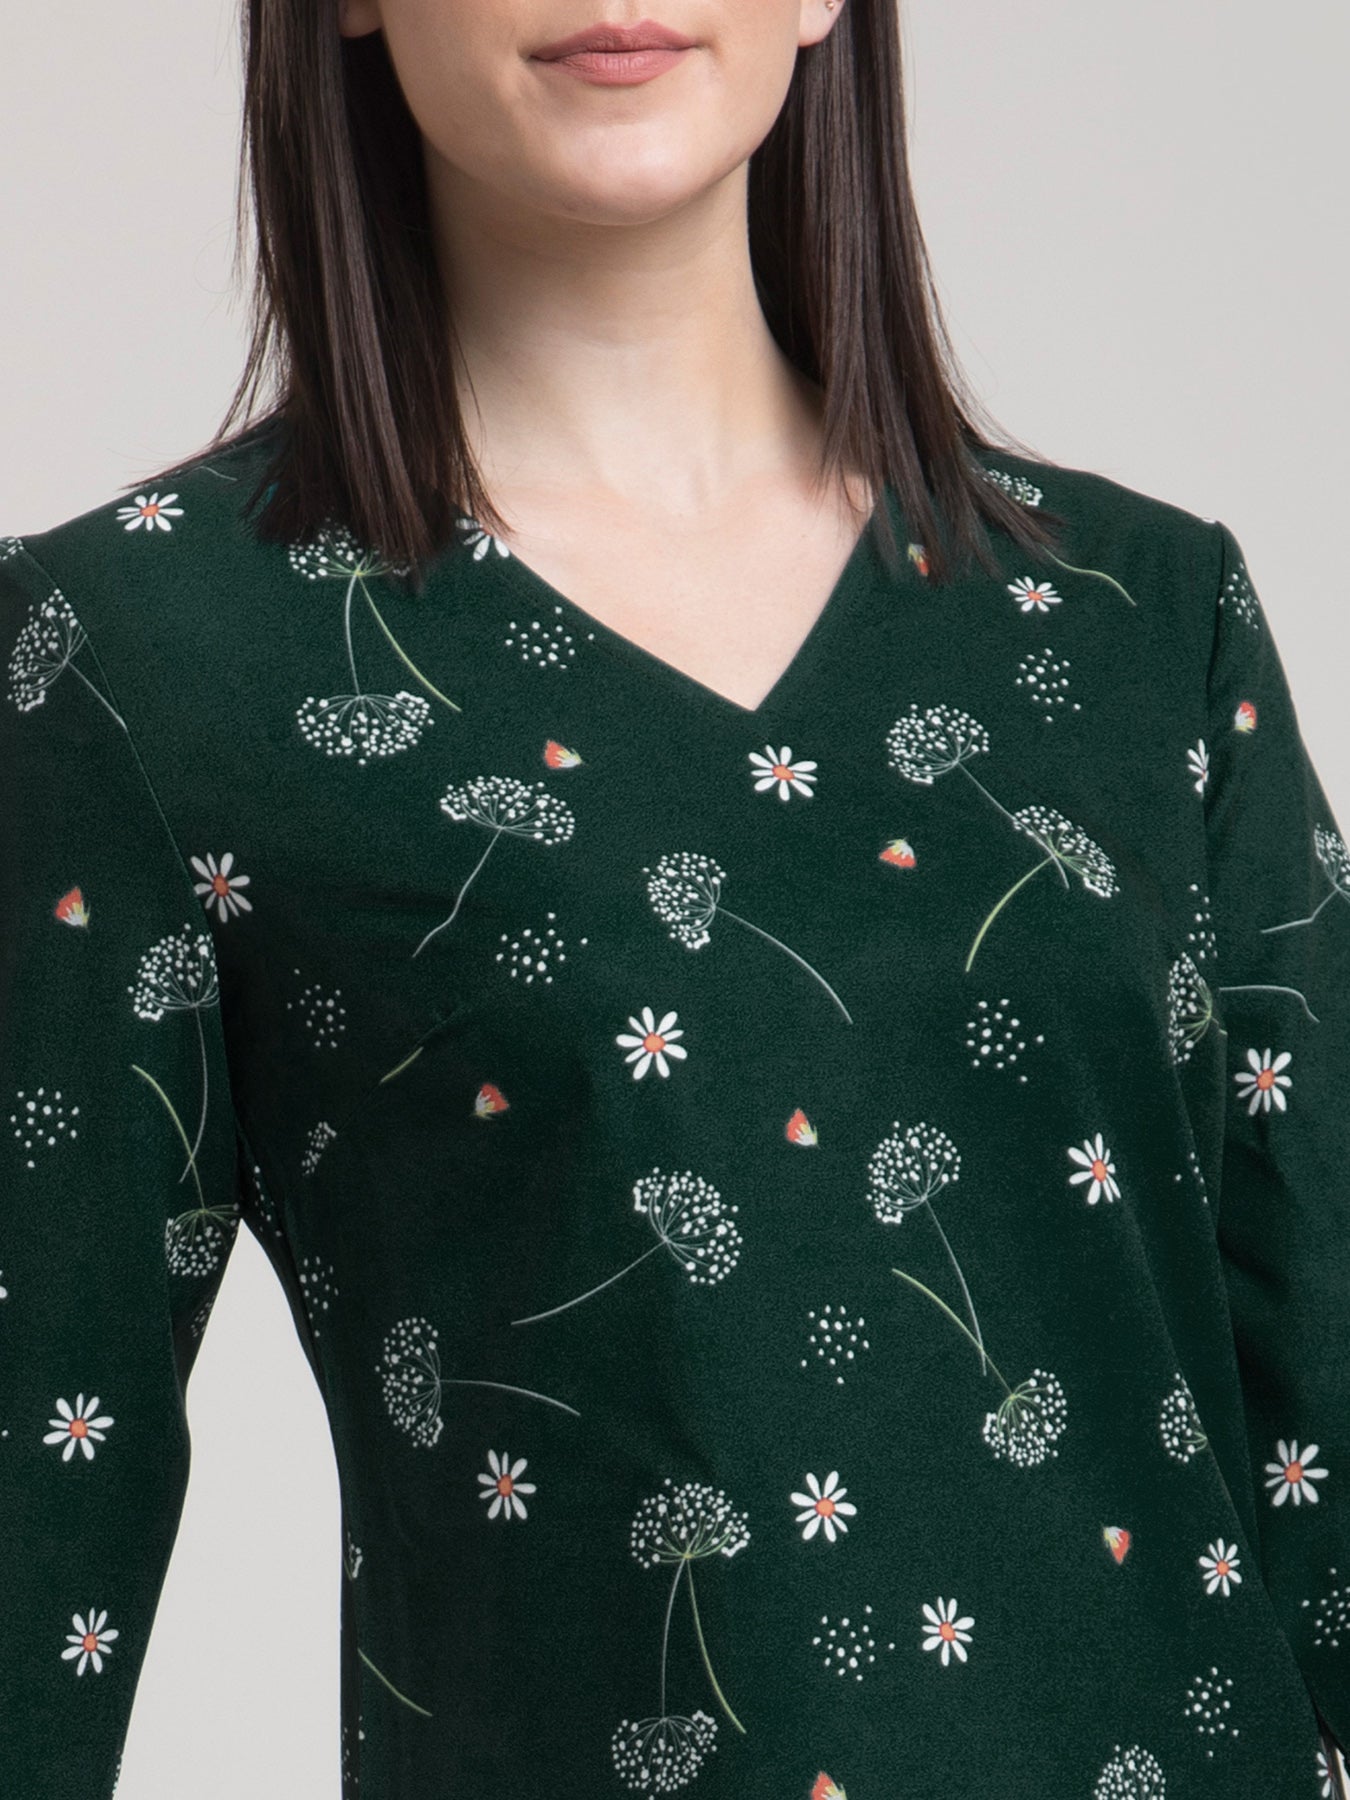 V Neck Ditsy Floral Top - Green and White